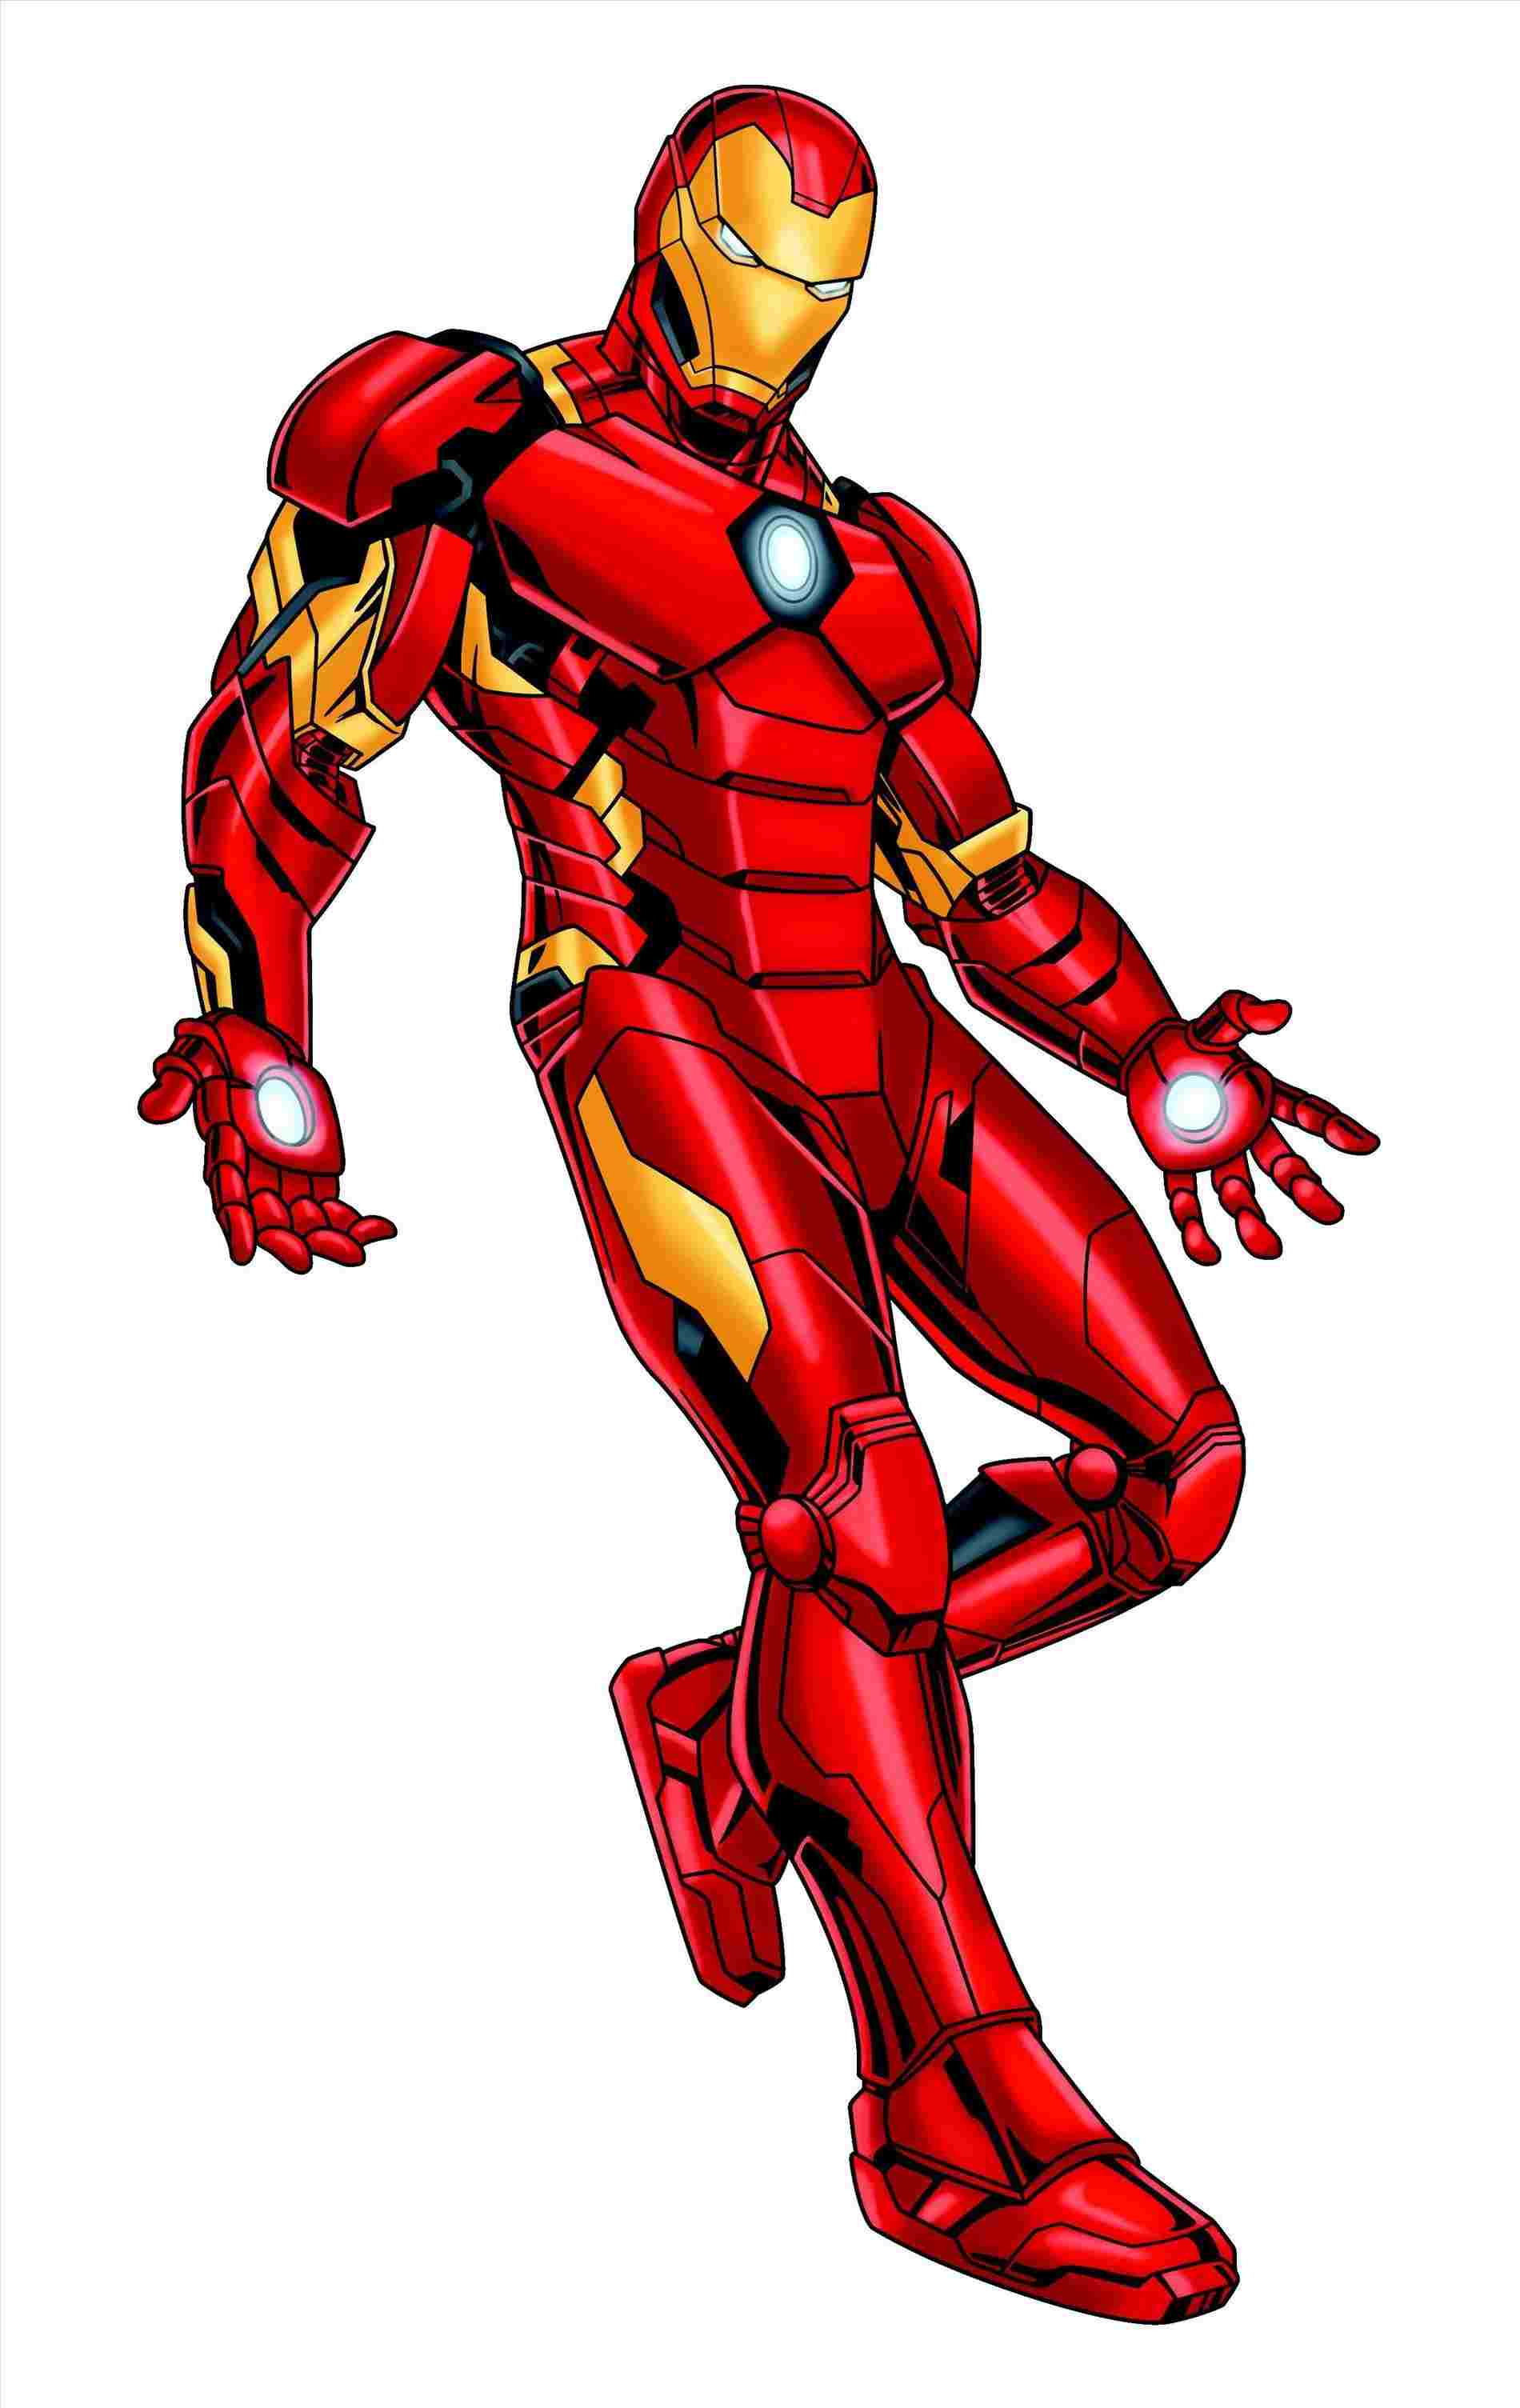 Creative Ironman Sketch Drawing for Adult